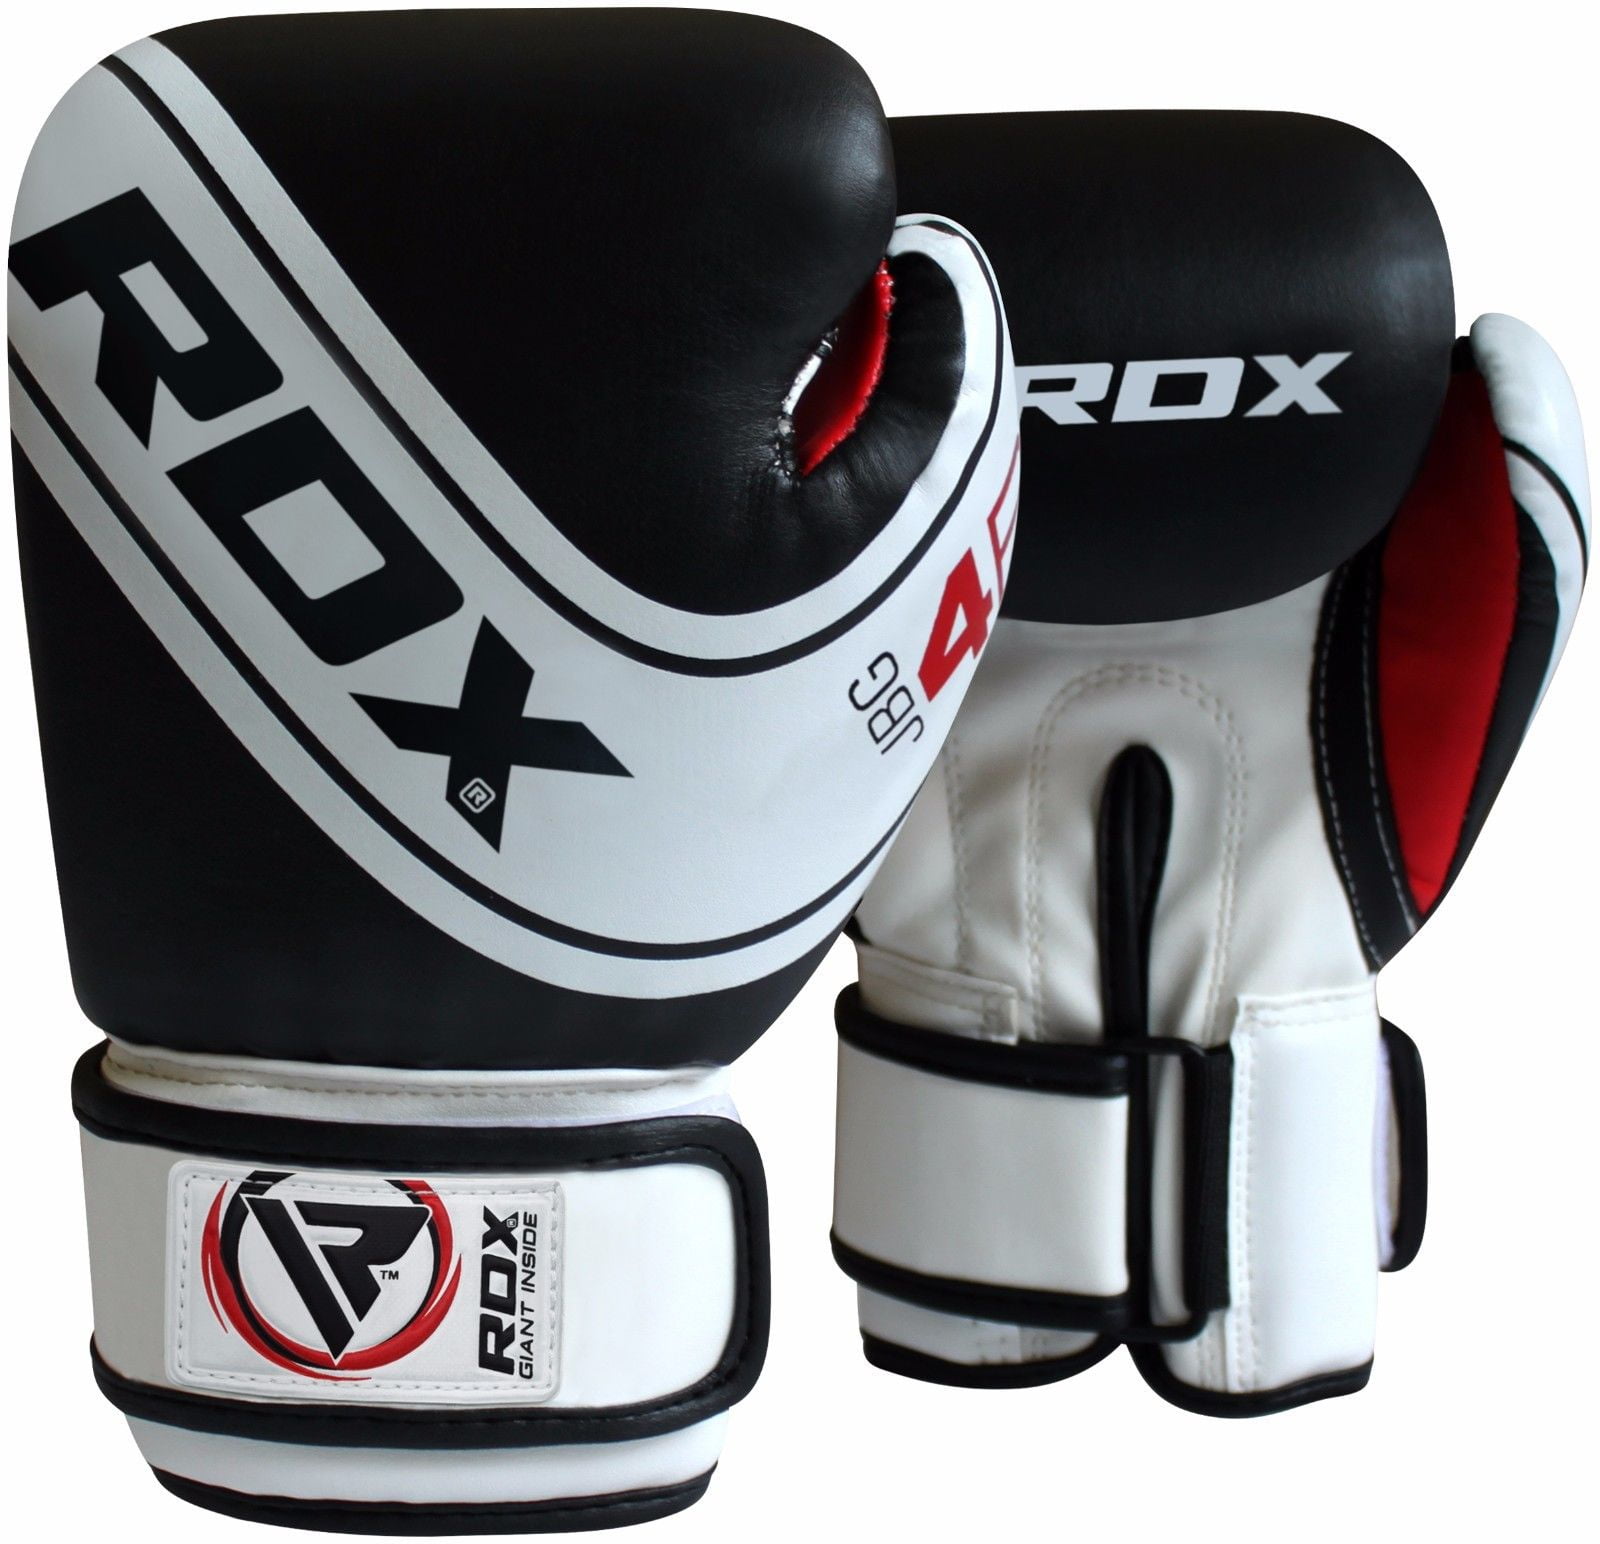 Maya Hide Leather Junior 4oz RDX Kids Boxing Gloves for Training and Muay Thai Good for Youth Punch Bag Fighting and Kickboxing Grappling Dummy and Focus Pads Punching 6oz Mitts for Sparring